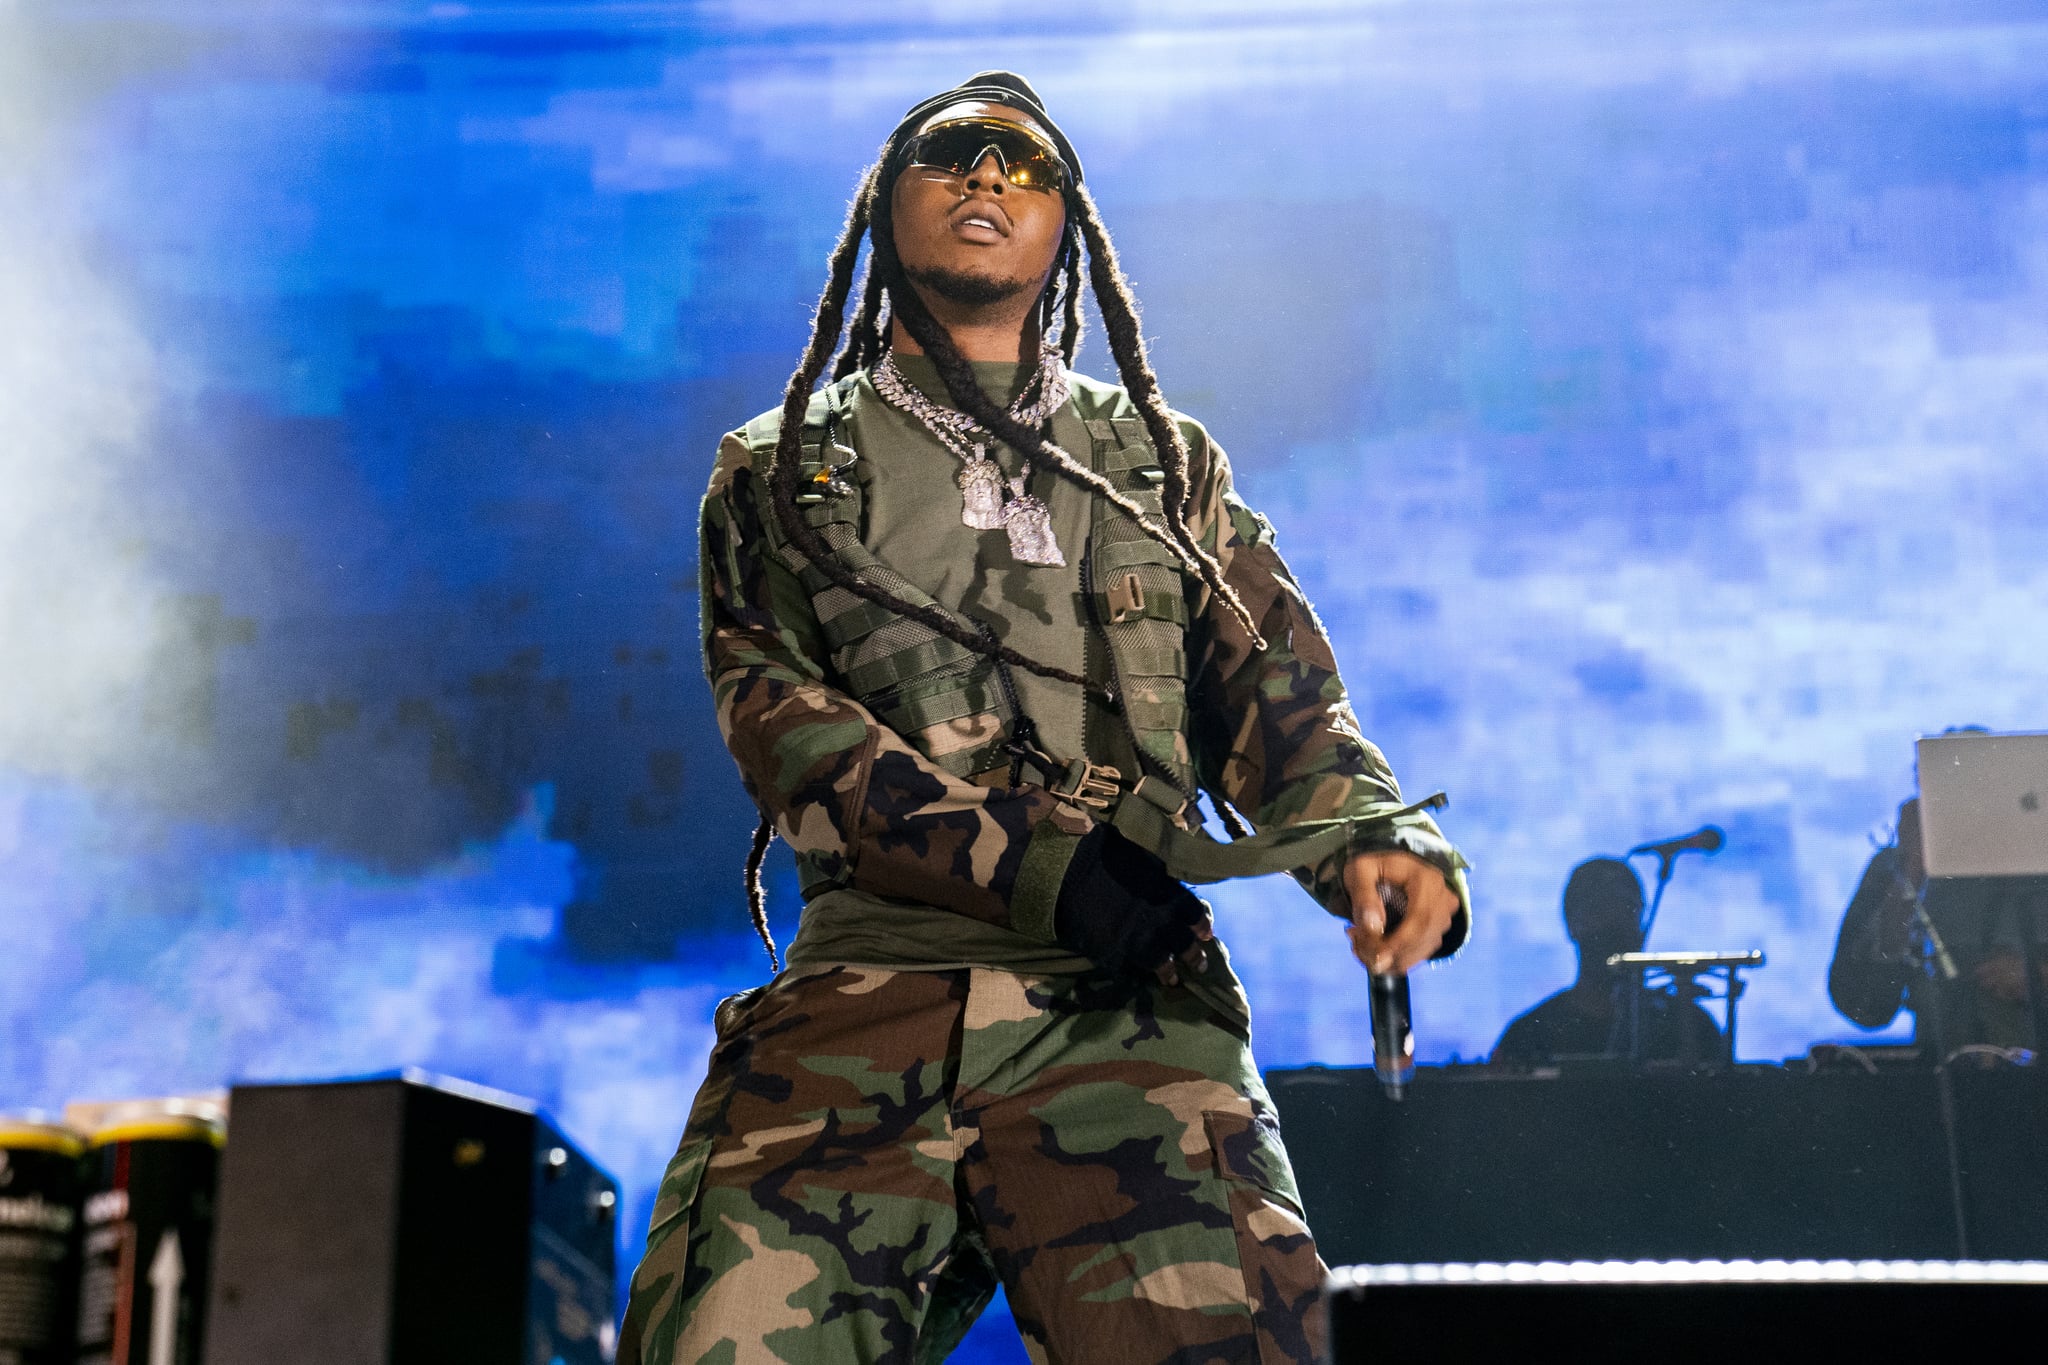 Takeoff performing at Lil Weezyana 2022 at Champions Square.